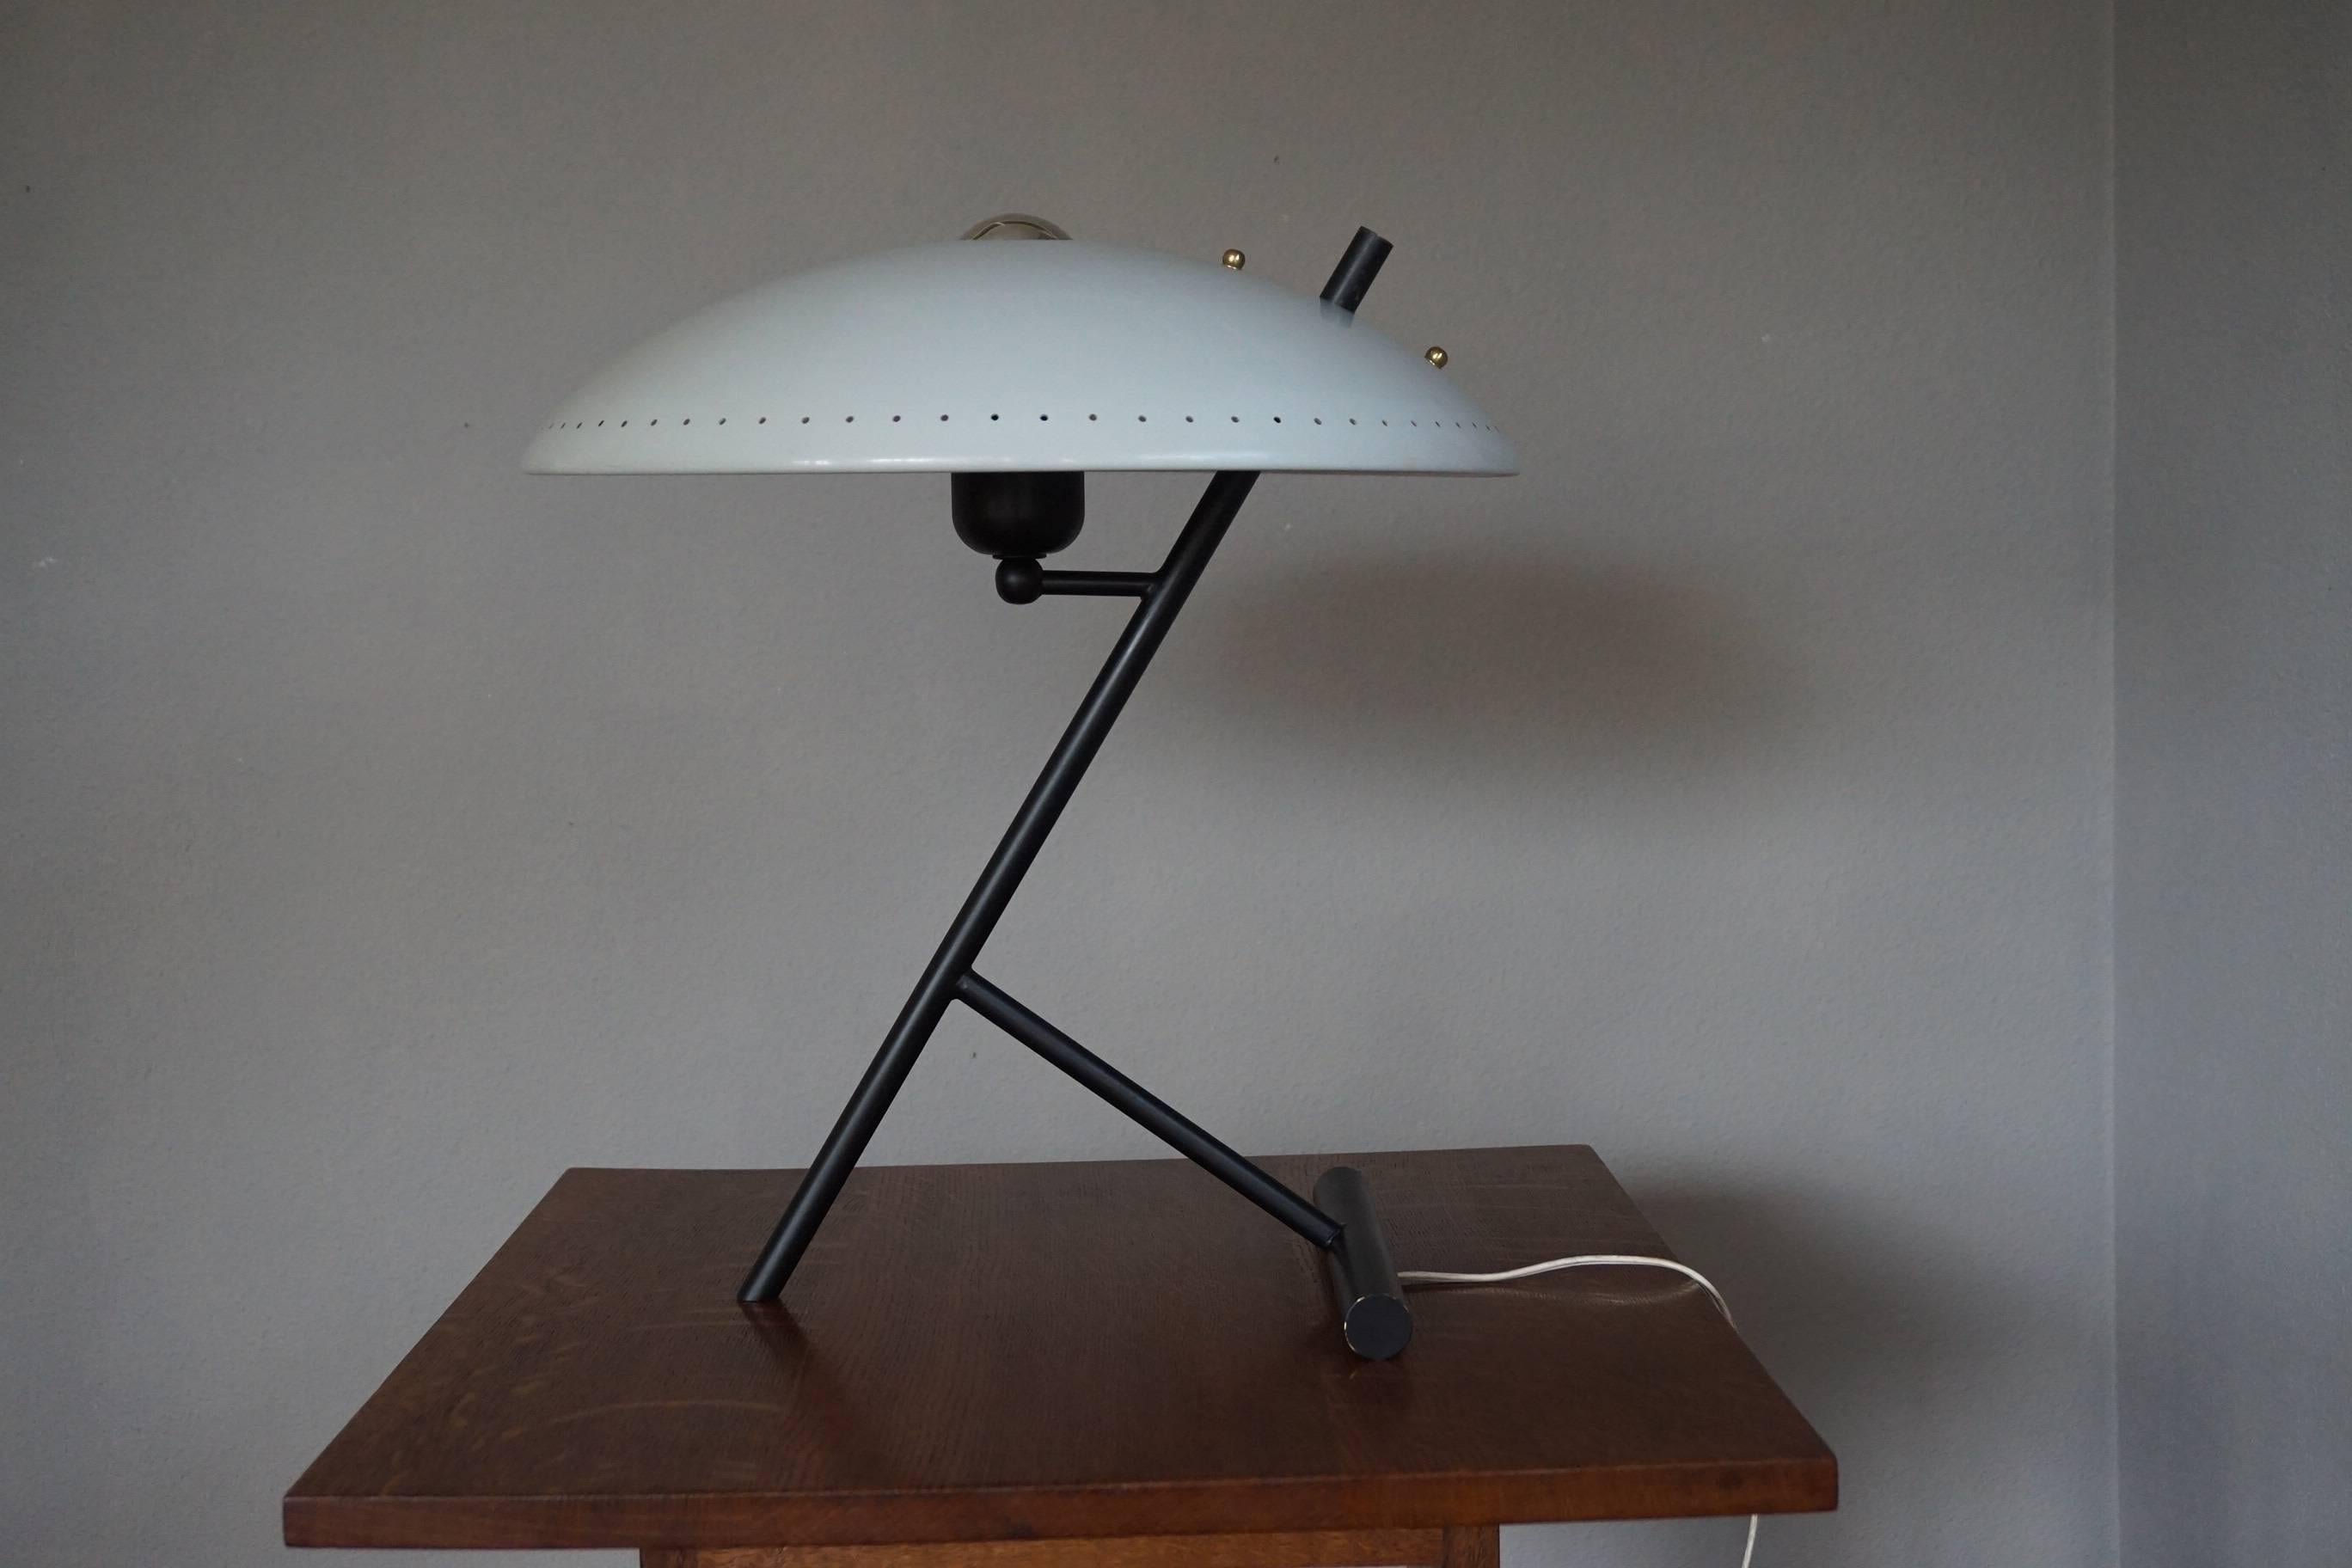 Timeless and stylish table lamp.

This wonderful midcentury table lamp by Louis Kalff is in beautiful condition. This color combination will look great in virtually every mid-century interior and this lamp is an absolute joy to look at, both on and